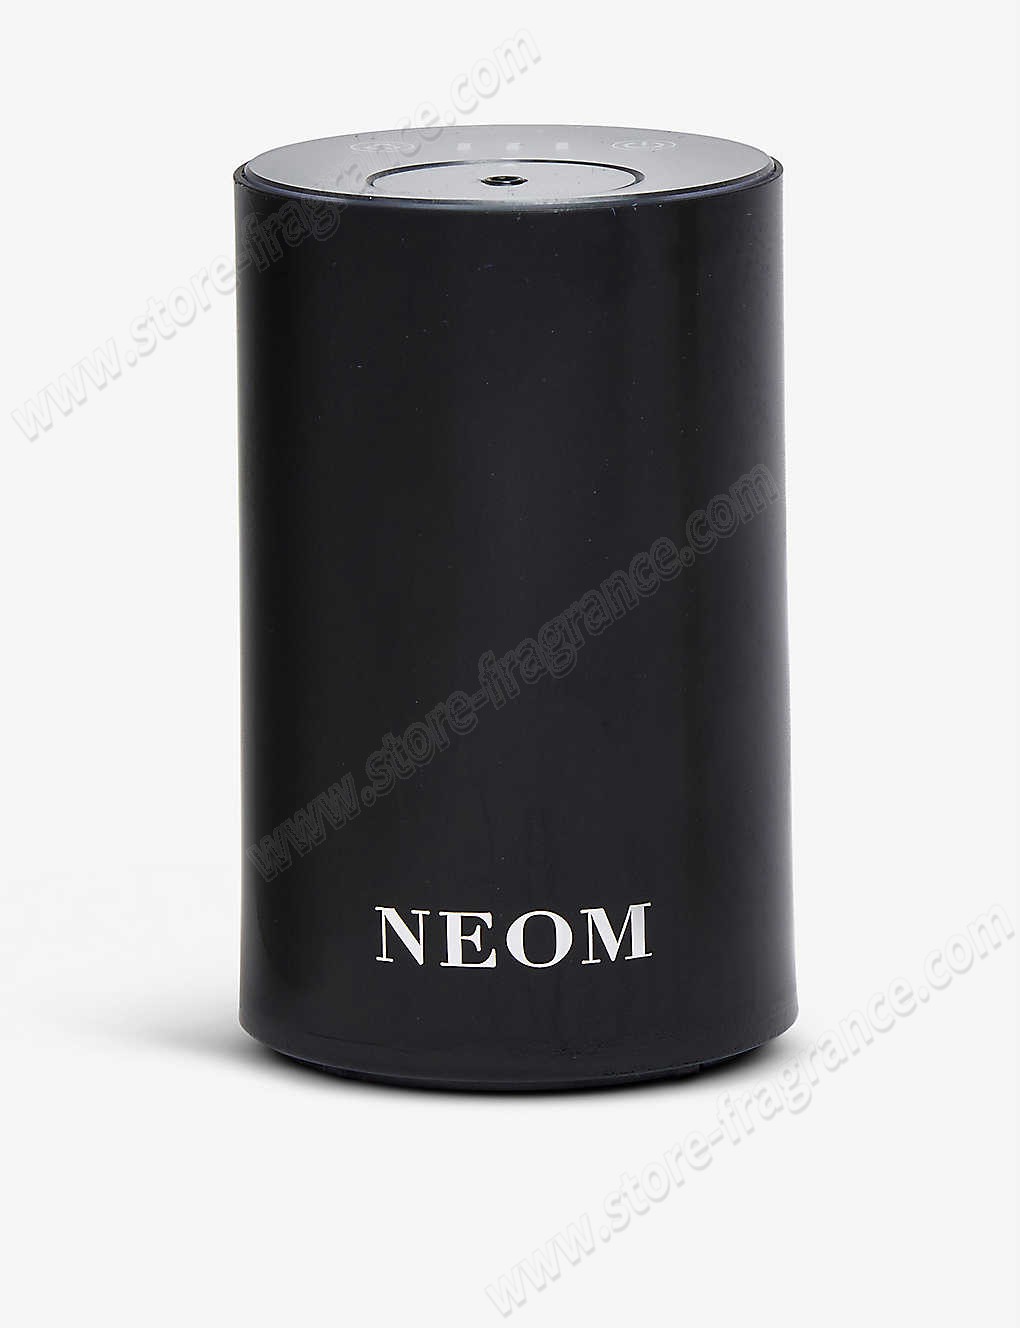 NEOM/Wellbeing Pod mini scented oil diffuser ✿ Discount Store - -0